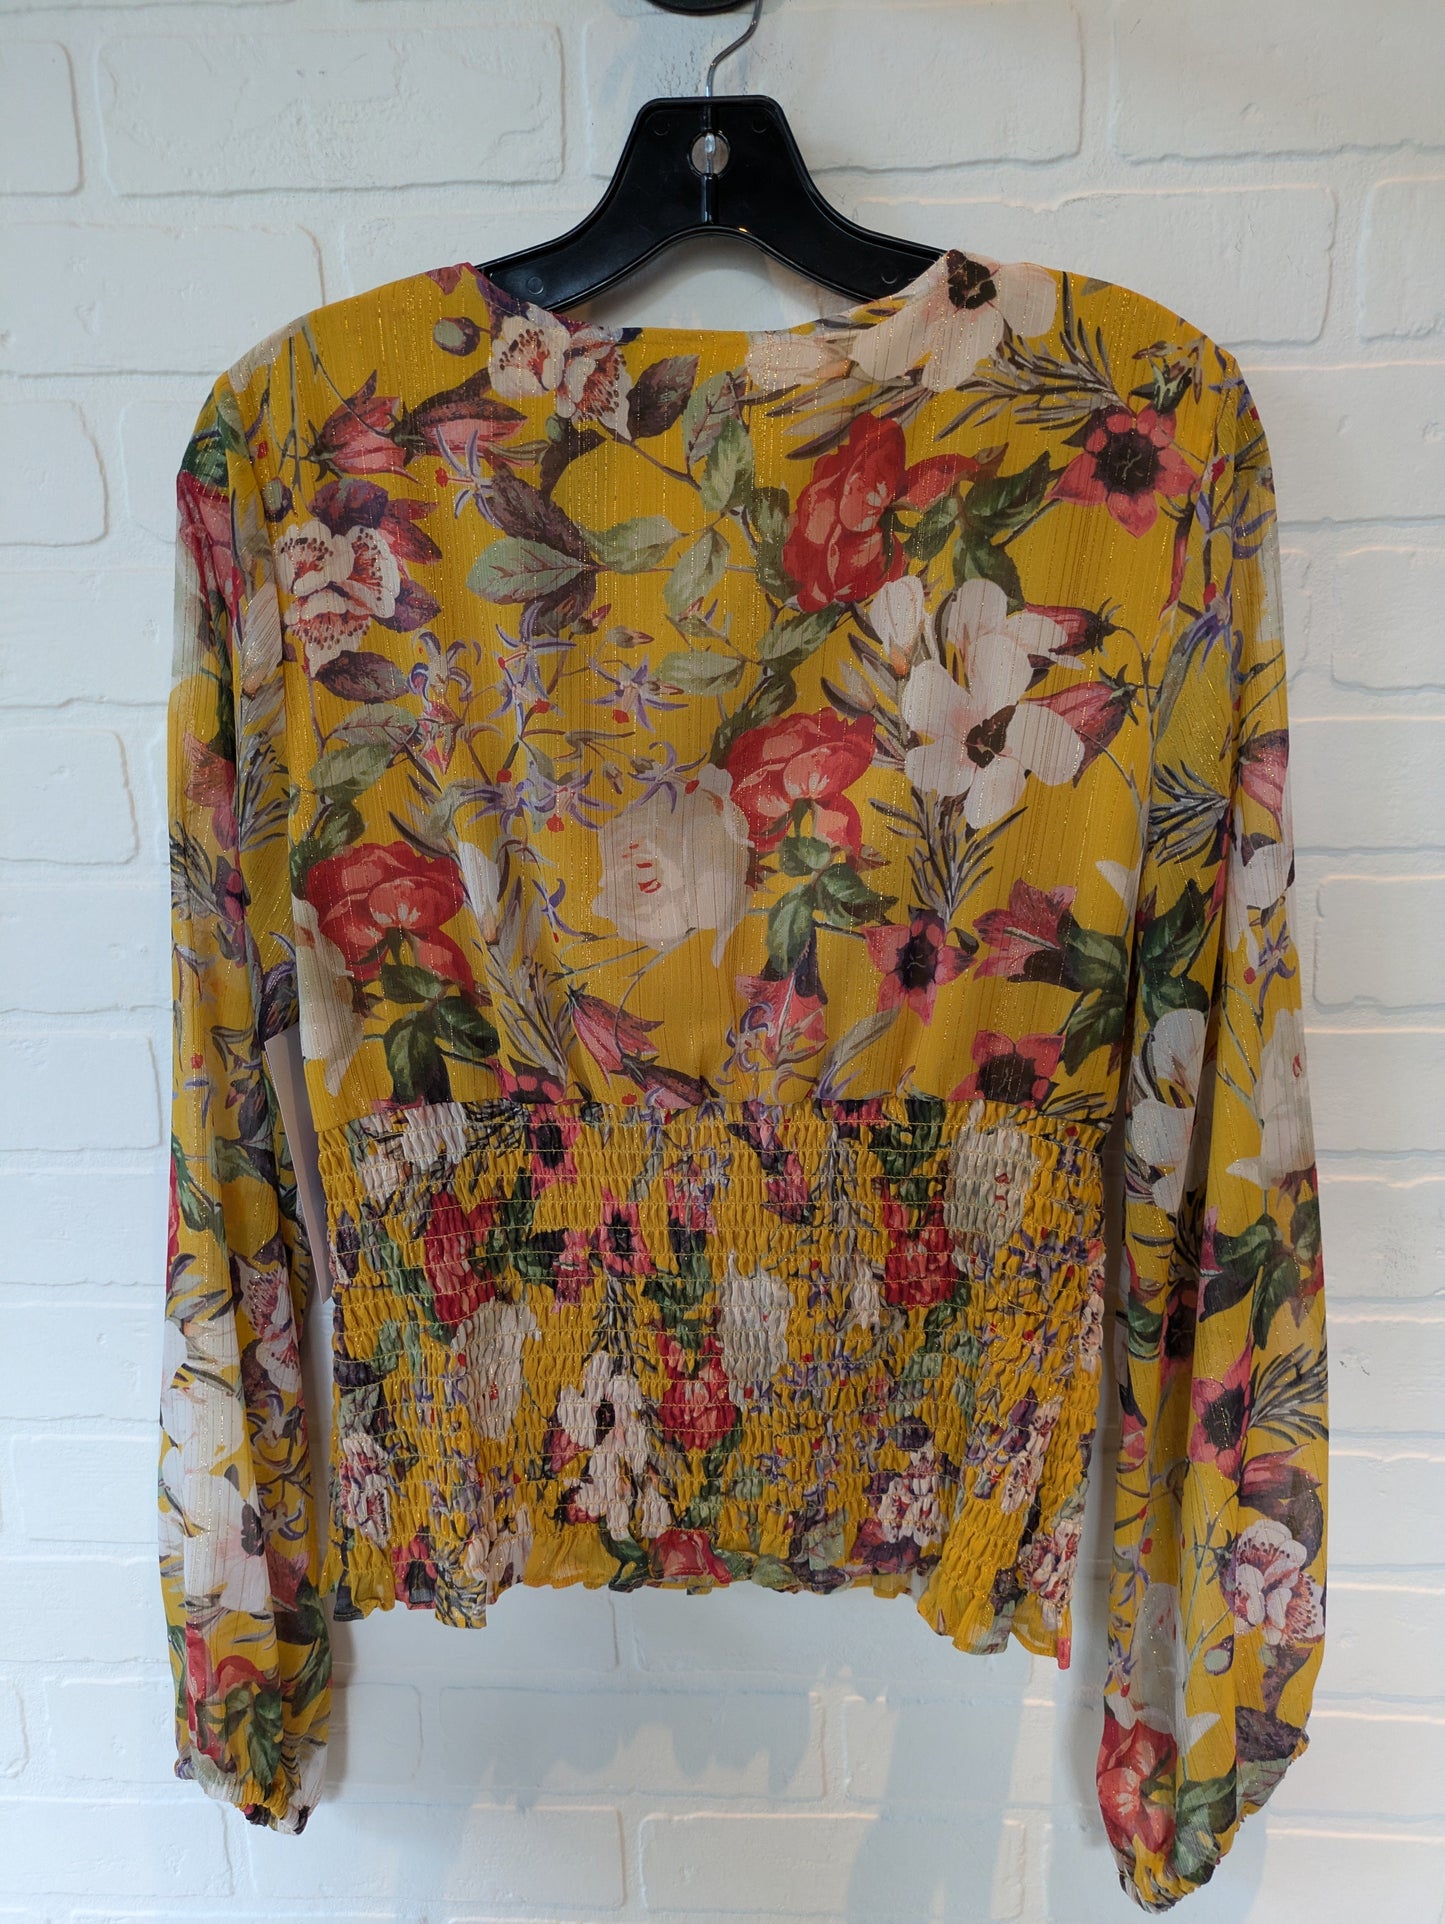 Yellow Top Long Sleeve Inc, Size M